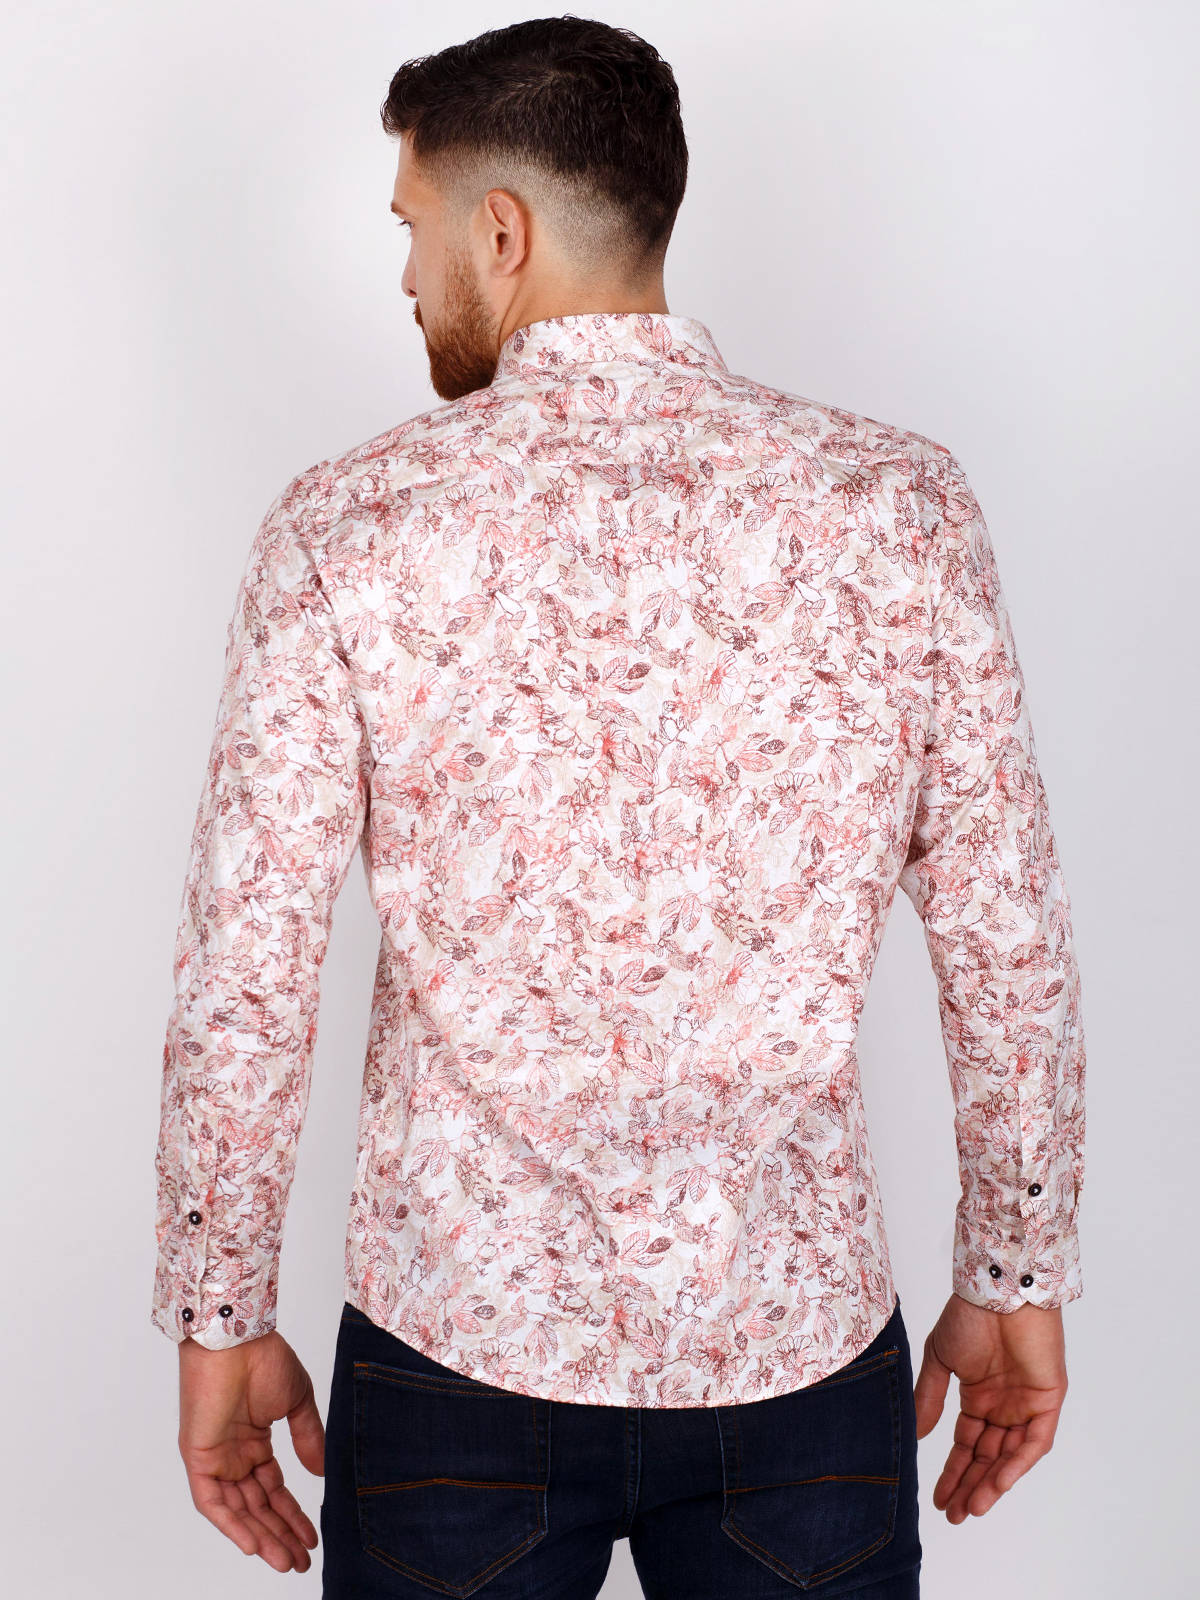 Cotton shirt with floral motif - 21501 € 38.81 img4